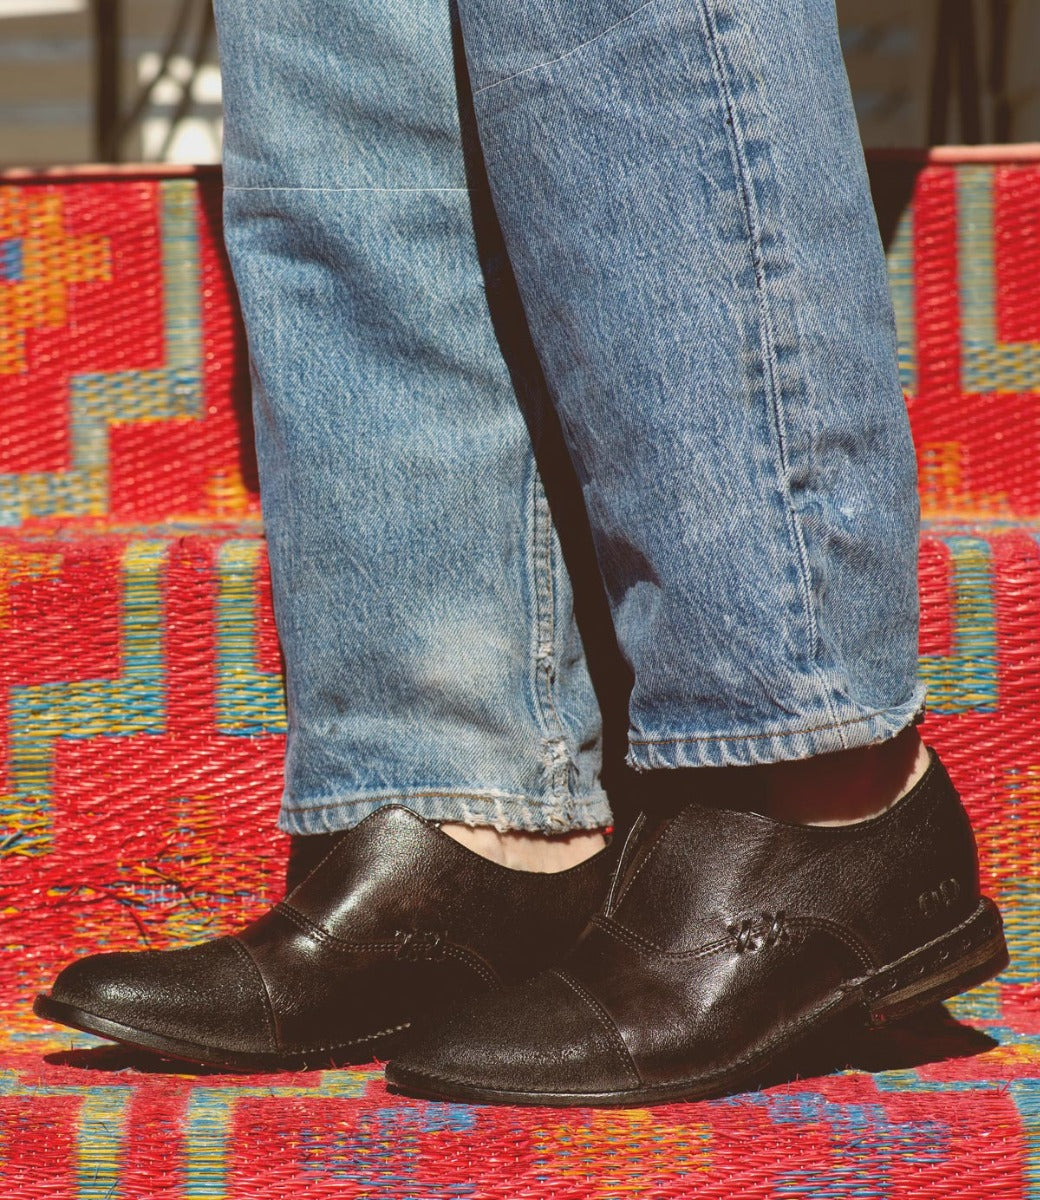 A pair of black Bed Stu Rose shoes on a person's feet.